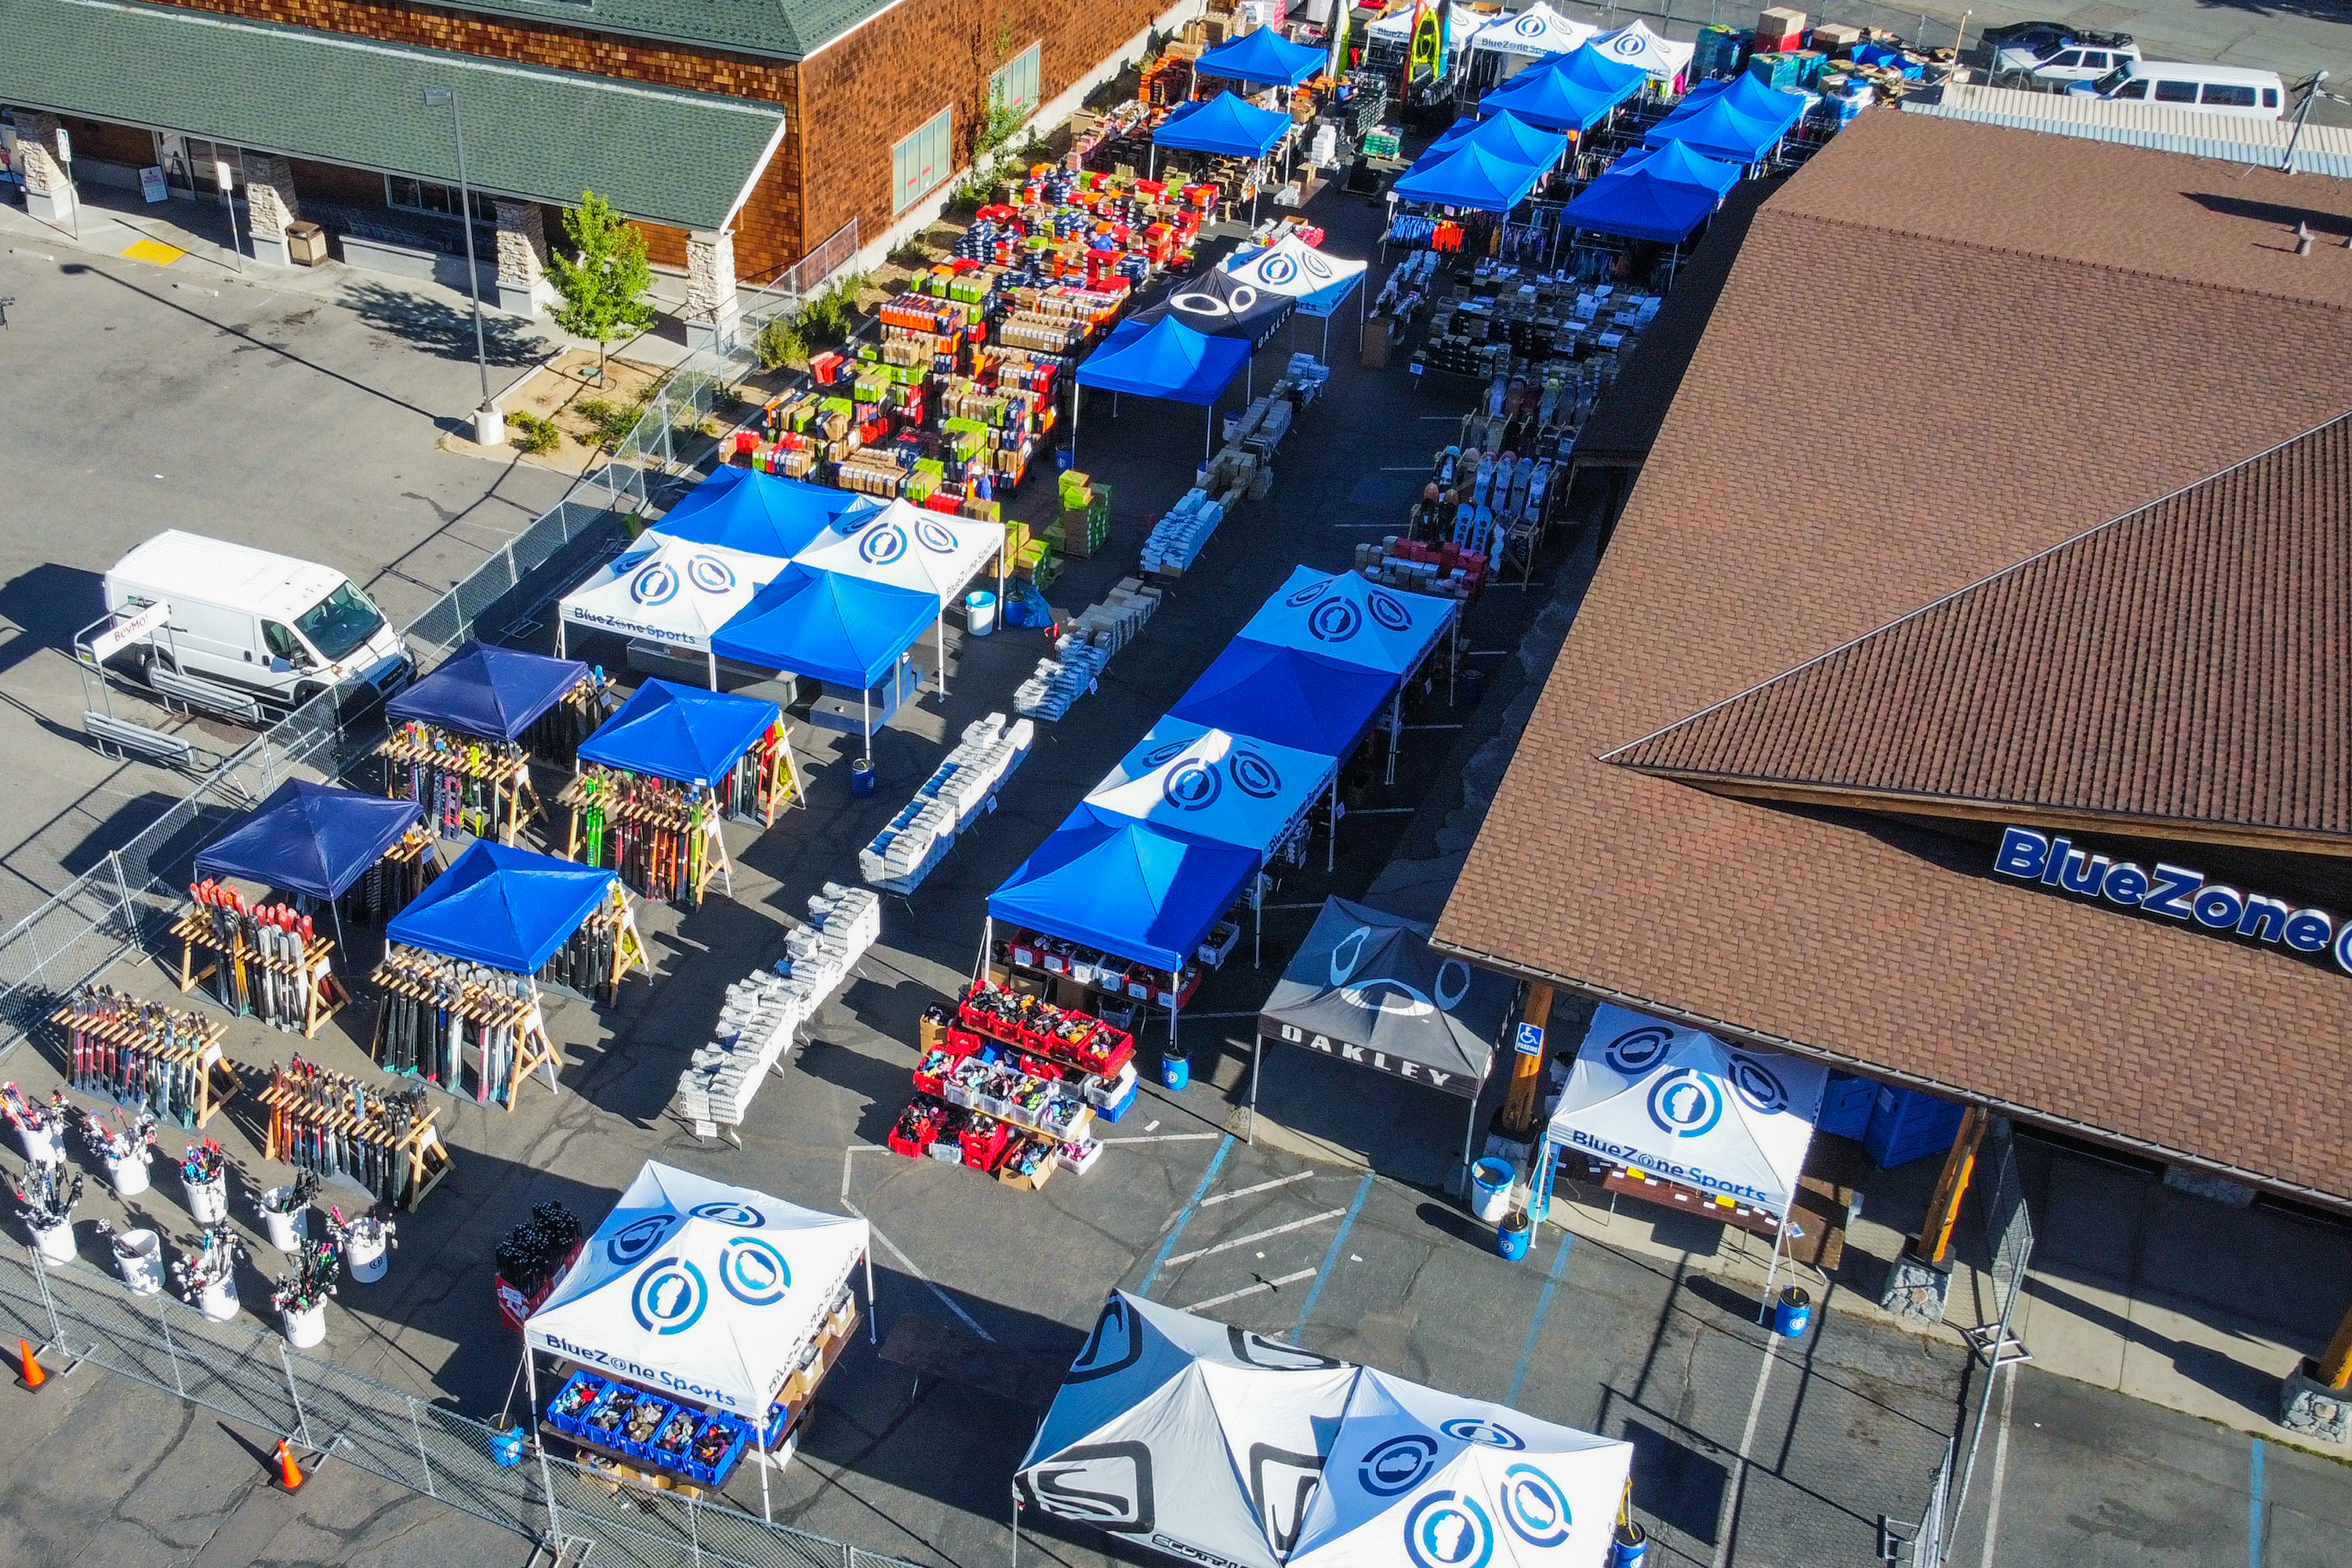 6th Annual Labor Day Tent Sale at BlueZone Sports